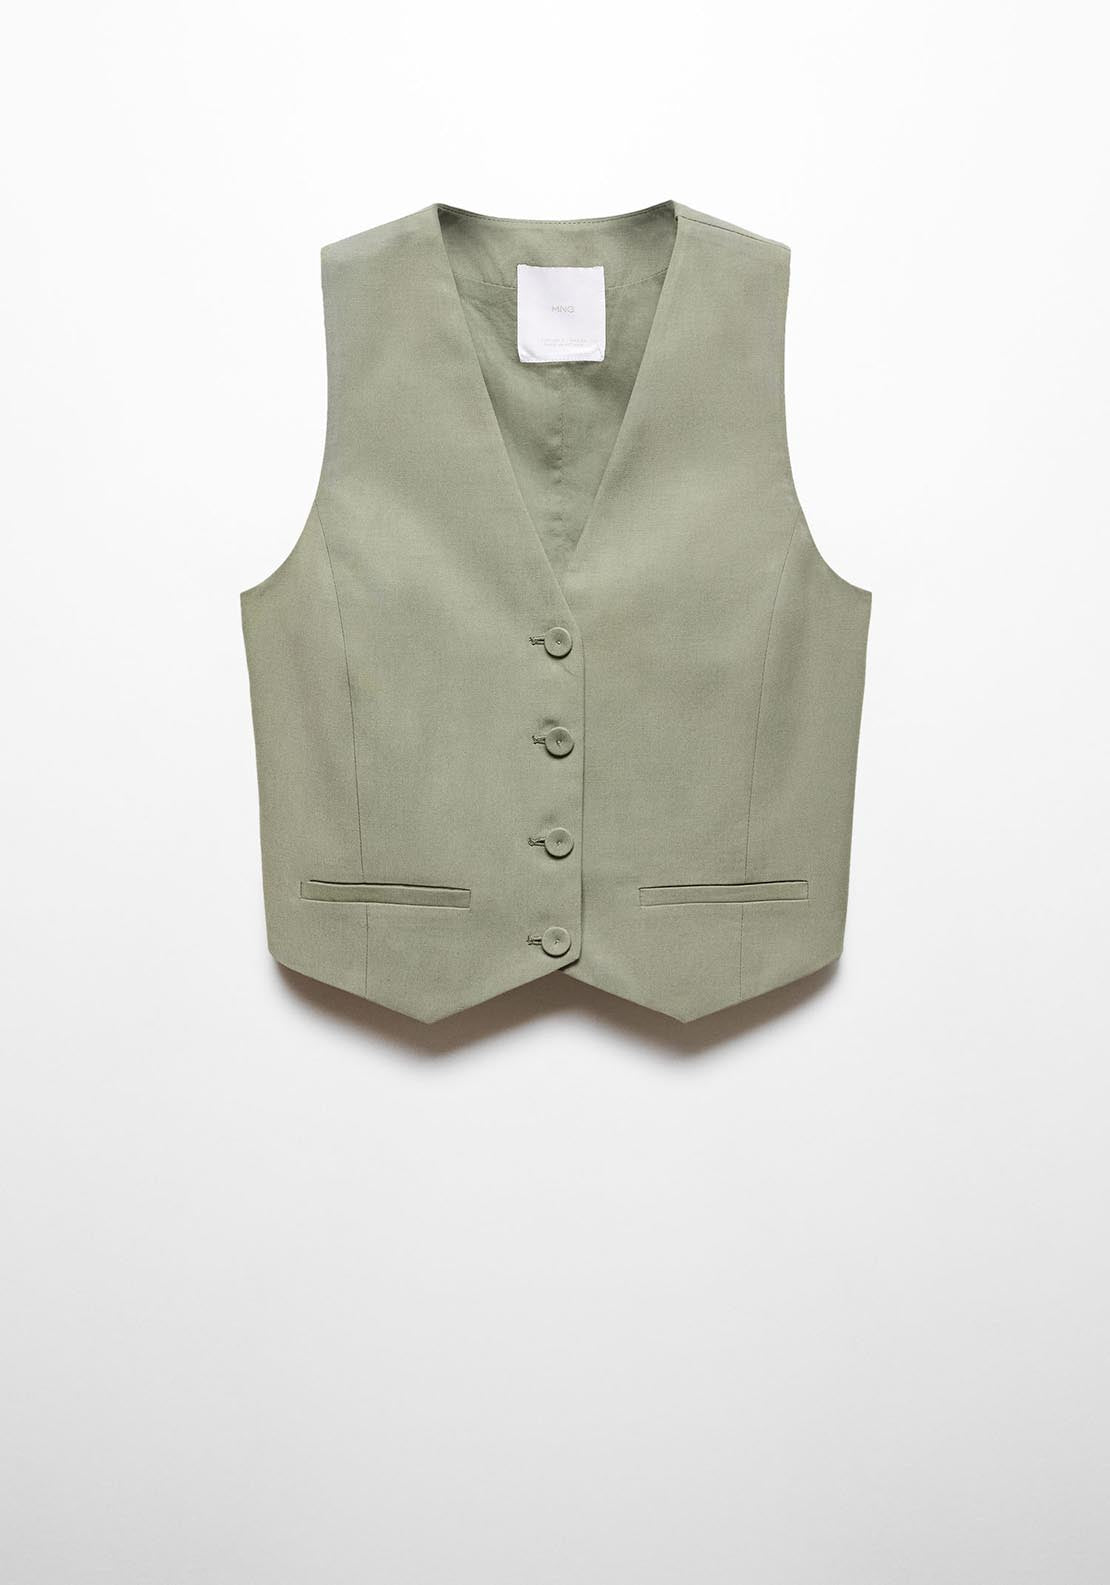 Mango Suit waistcoat with buttons 6 Shaws Department Stores